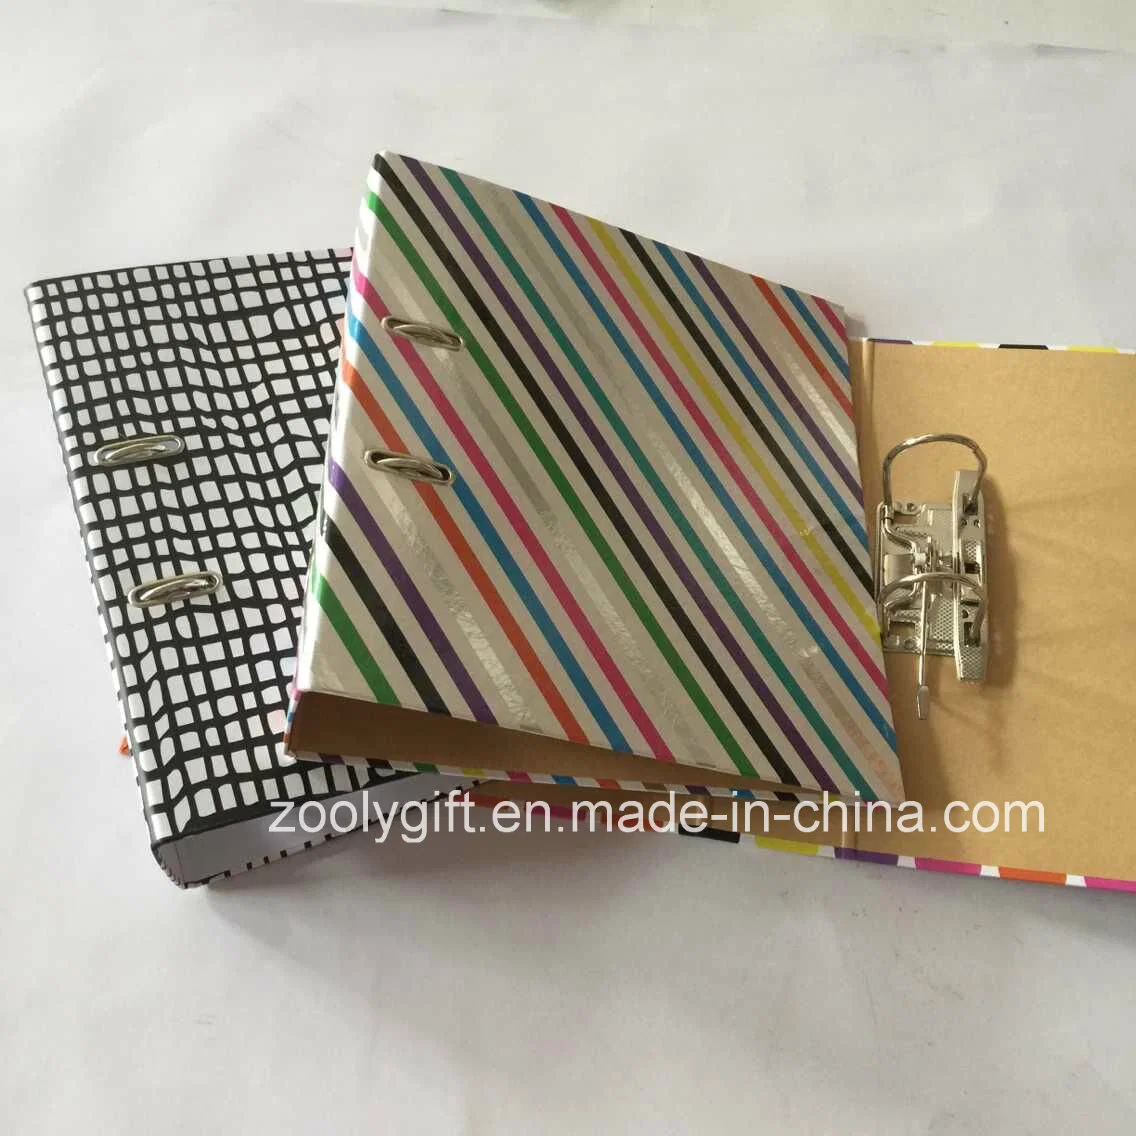 Recycle Design Printing 2''/3'' A4 /FC Cardboard Paper Lever Arch File Office File Folder